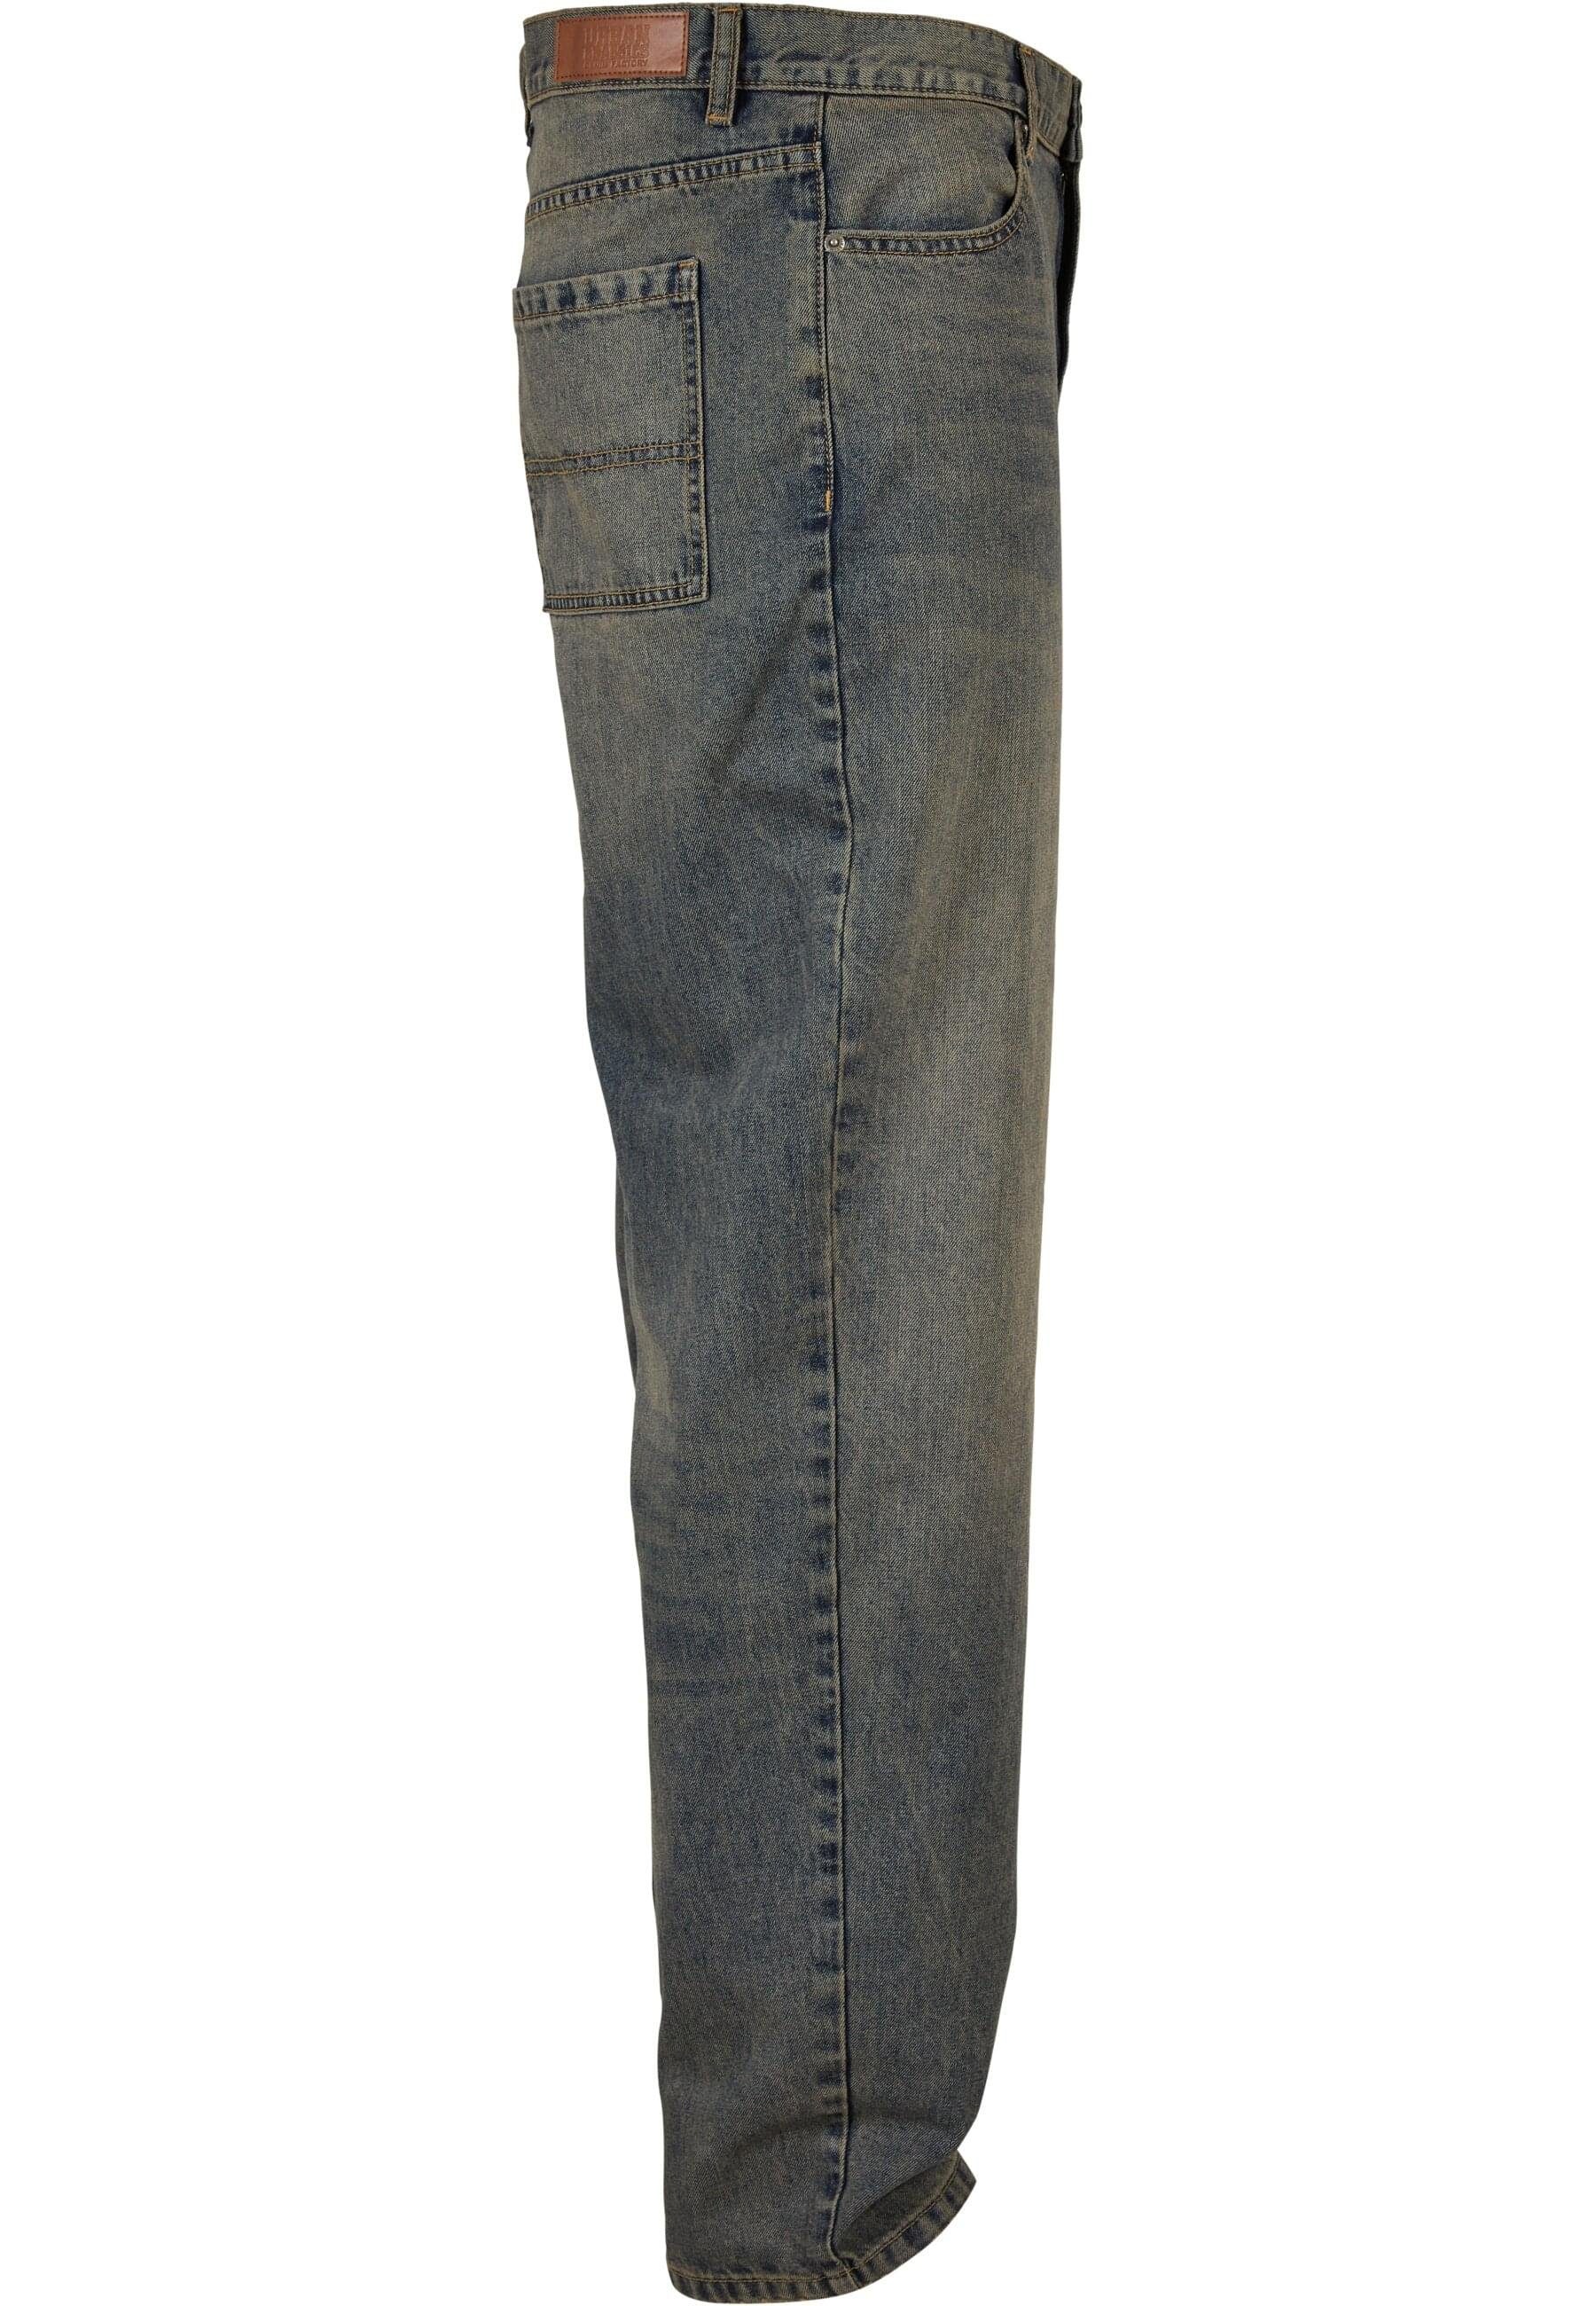 Jeans 2000 Jeans Bequeme URBAN CLASSICS (1-tlg) washed Herren 90‘s